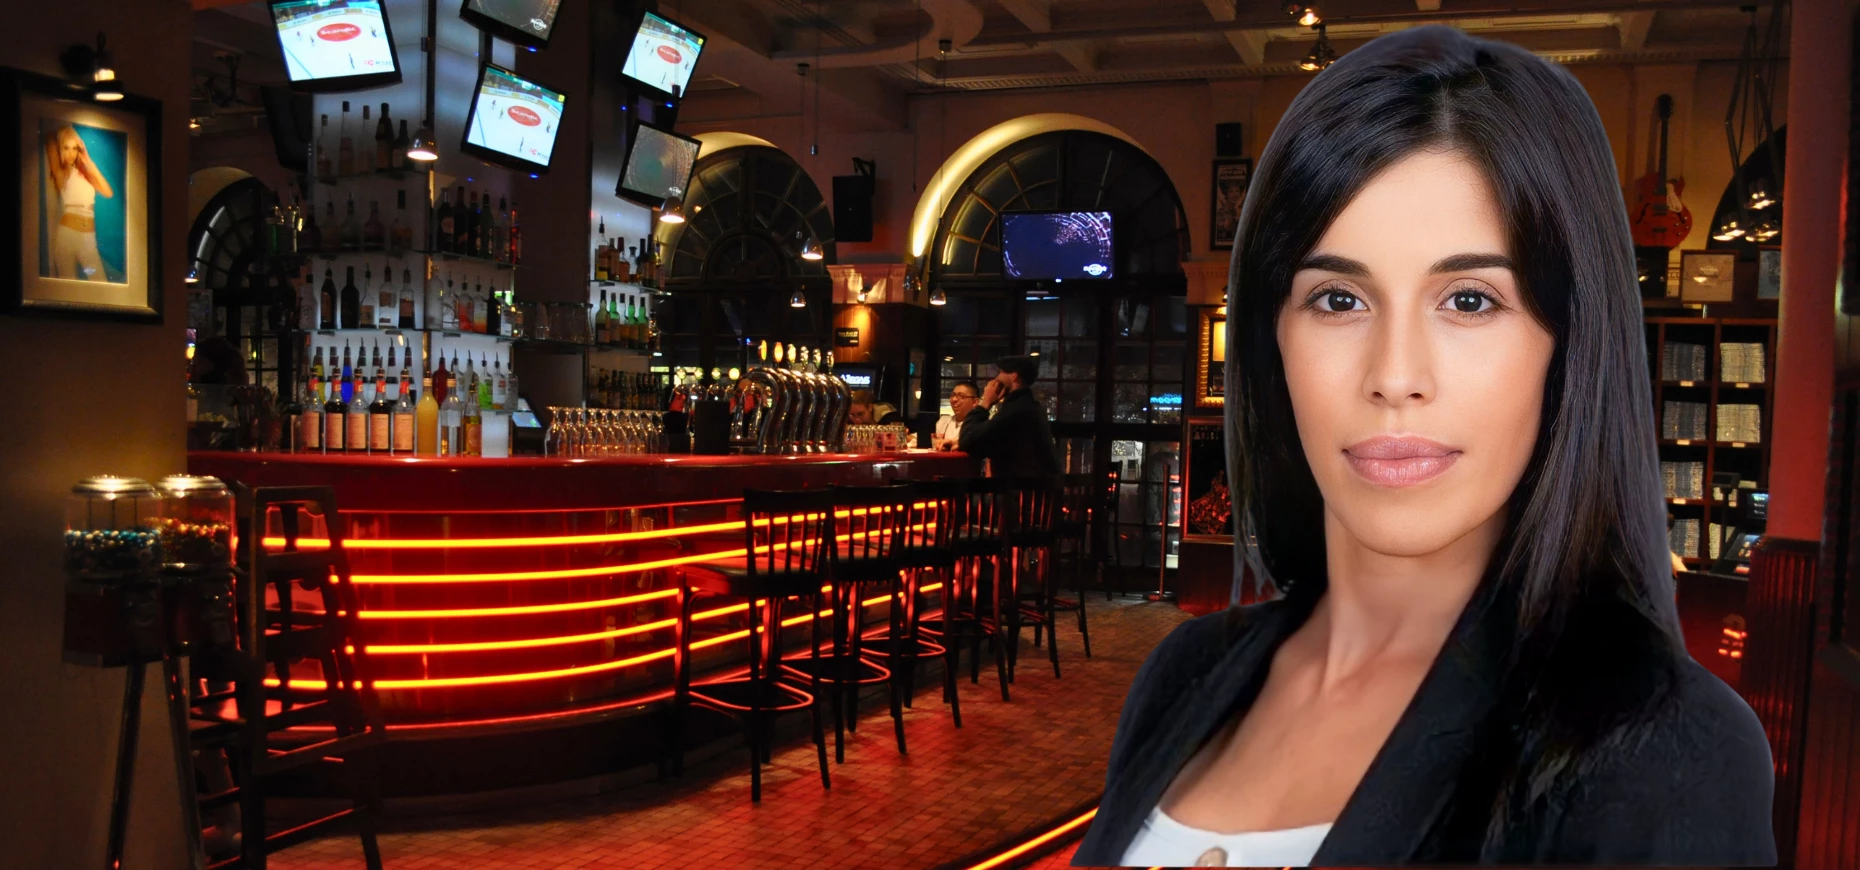 Elena Alvarez, Senior Vice President of Marketing and Brand Partnerships, pictured against the backdrop of a Hard Rock Cafe interior.